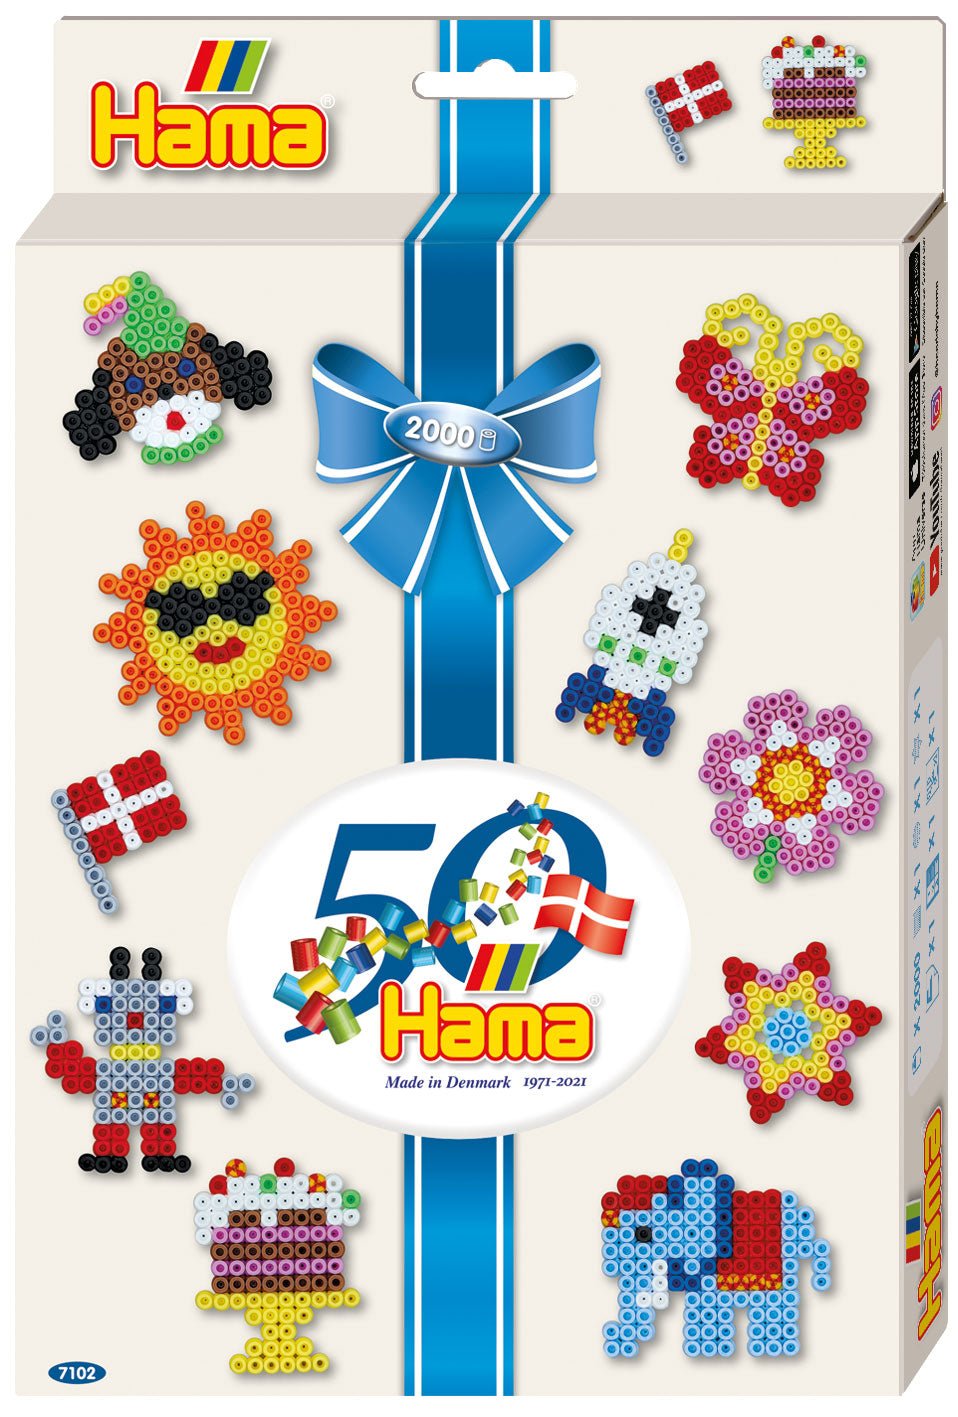 50th Anniversary Hama Midi Beads Activity Box Set with 2,000 Beads, 3 pegboards, design sheet, intsructions and ironing paper